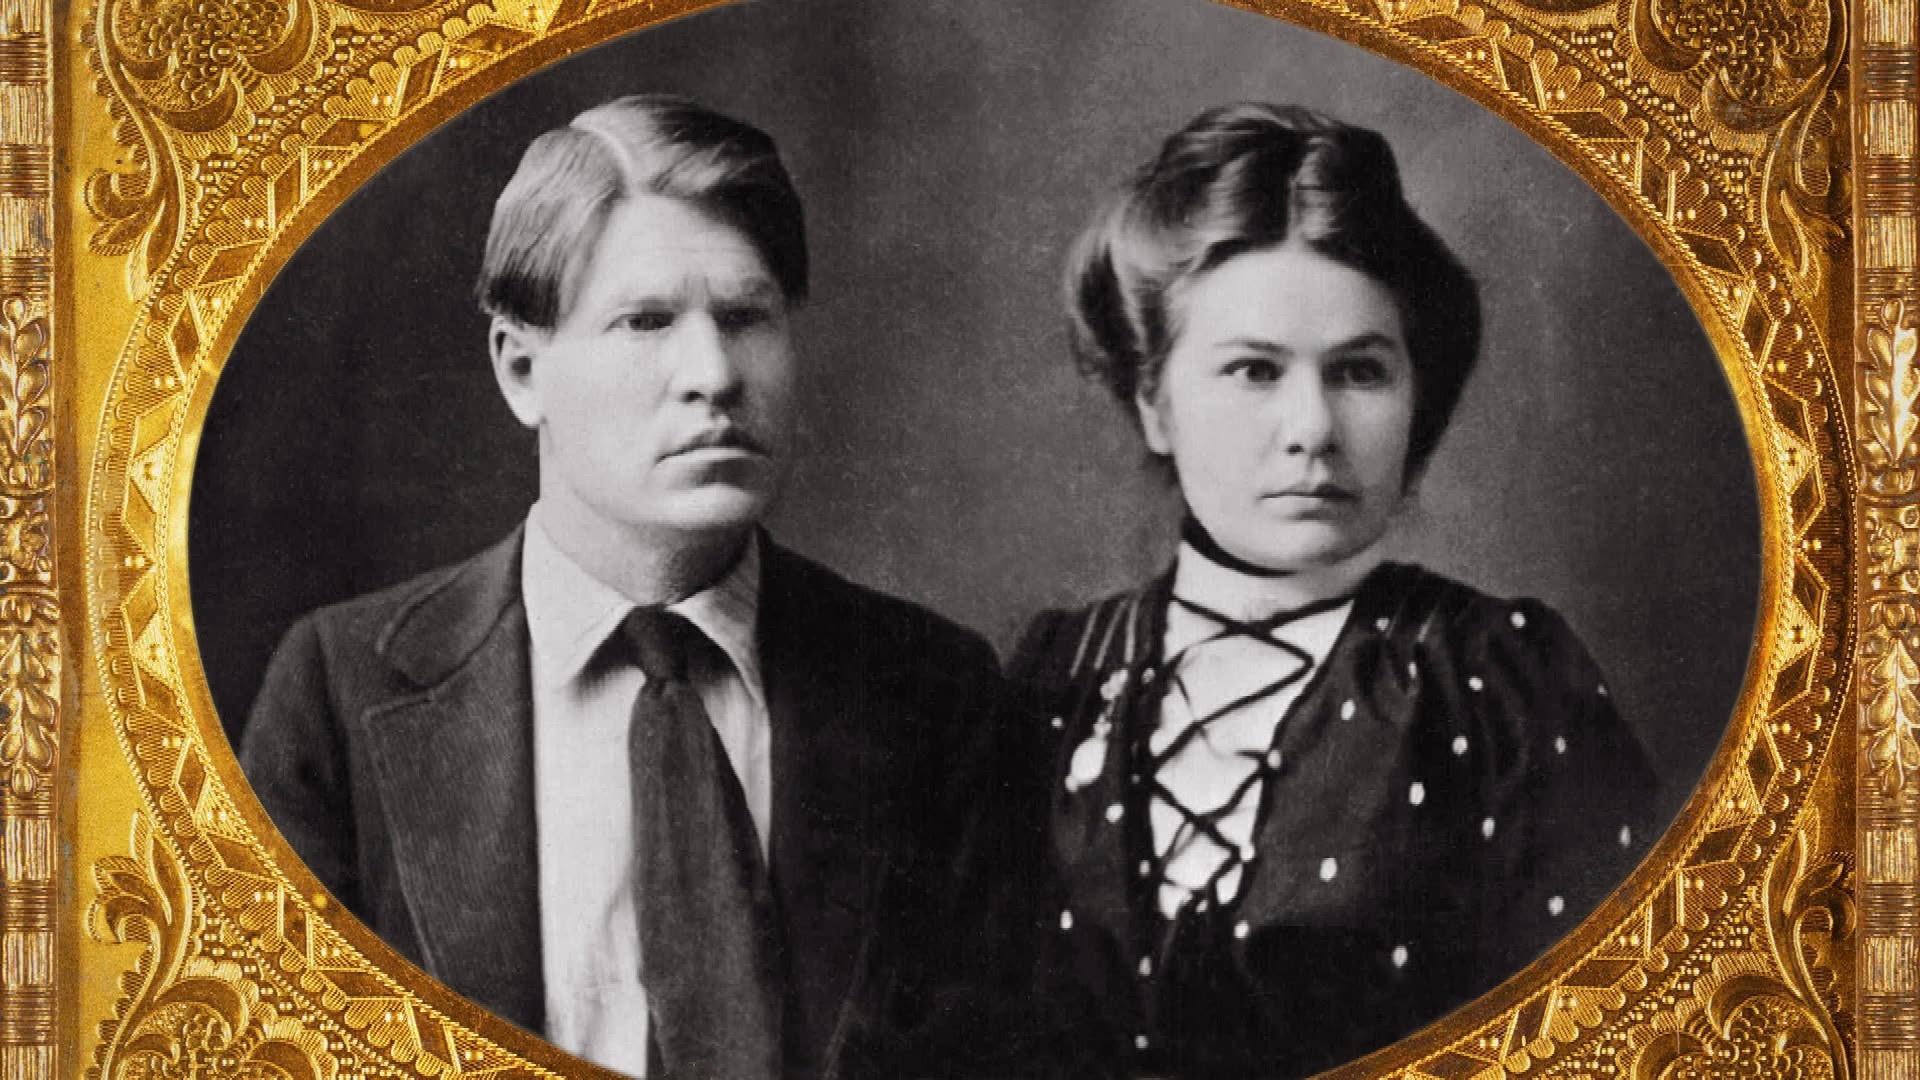 Black and white portrait of Charles M. Russell and Nancy Cooper Russell at their wedding.